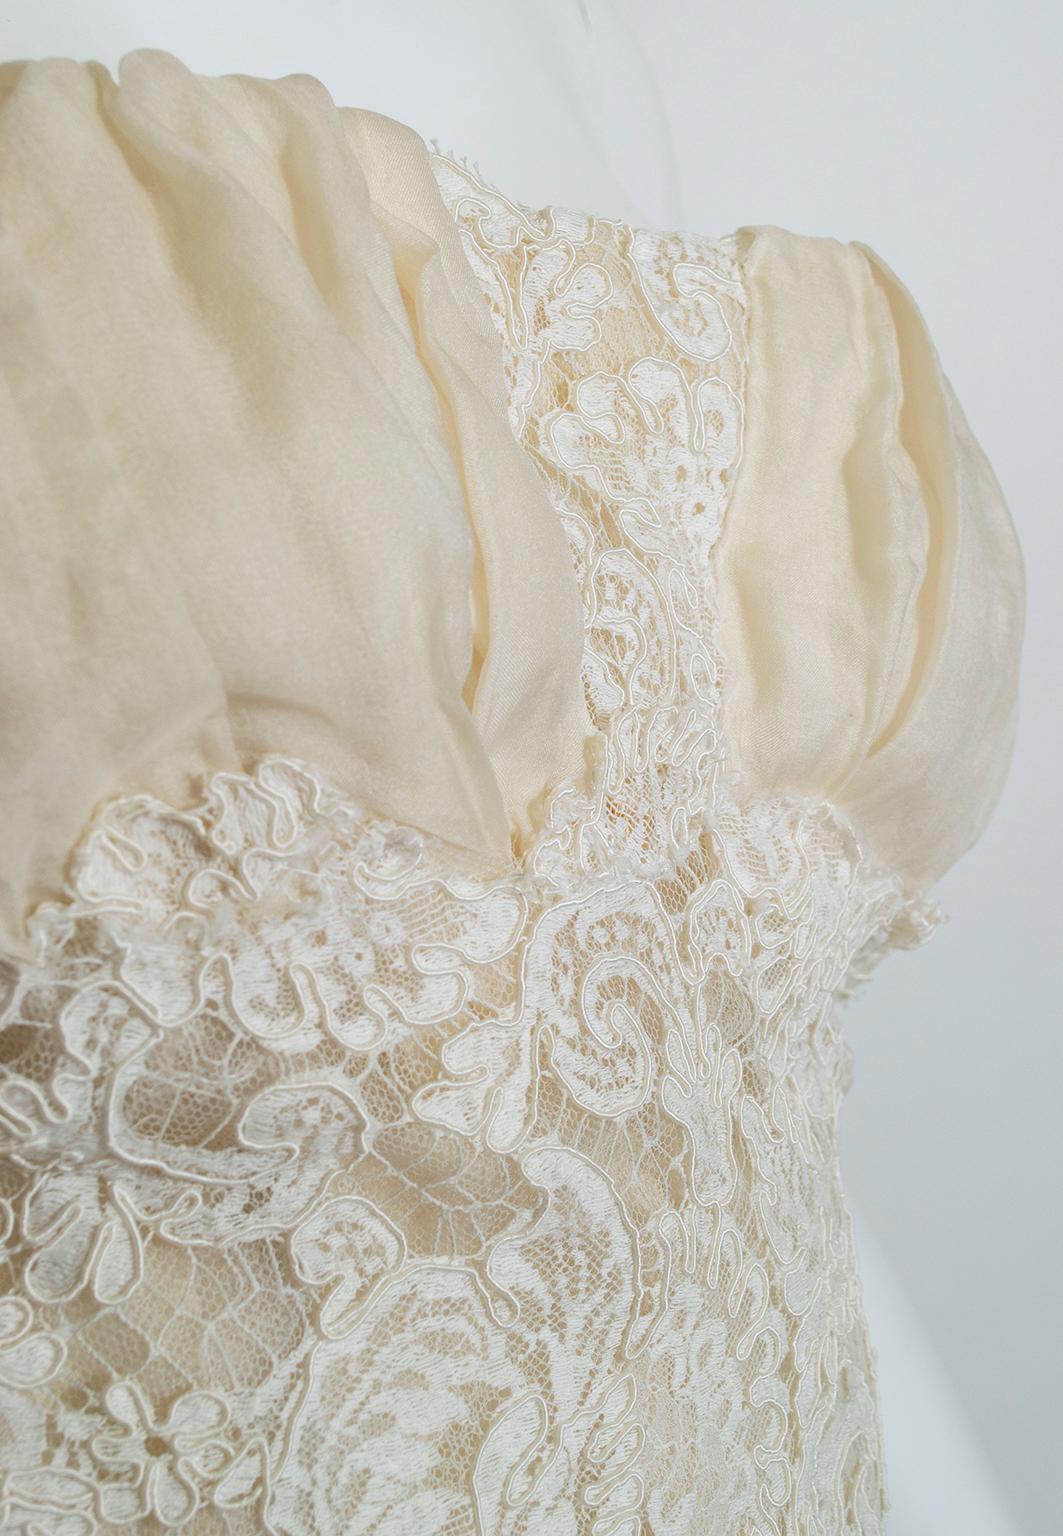 Strapless Ivory Guipure Lace Corseted Robe Française Wedding Dress - XS, 1950s 2